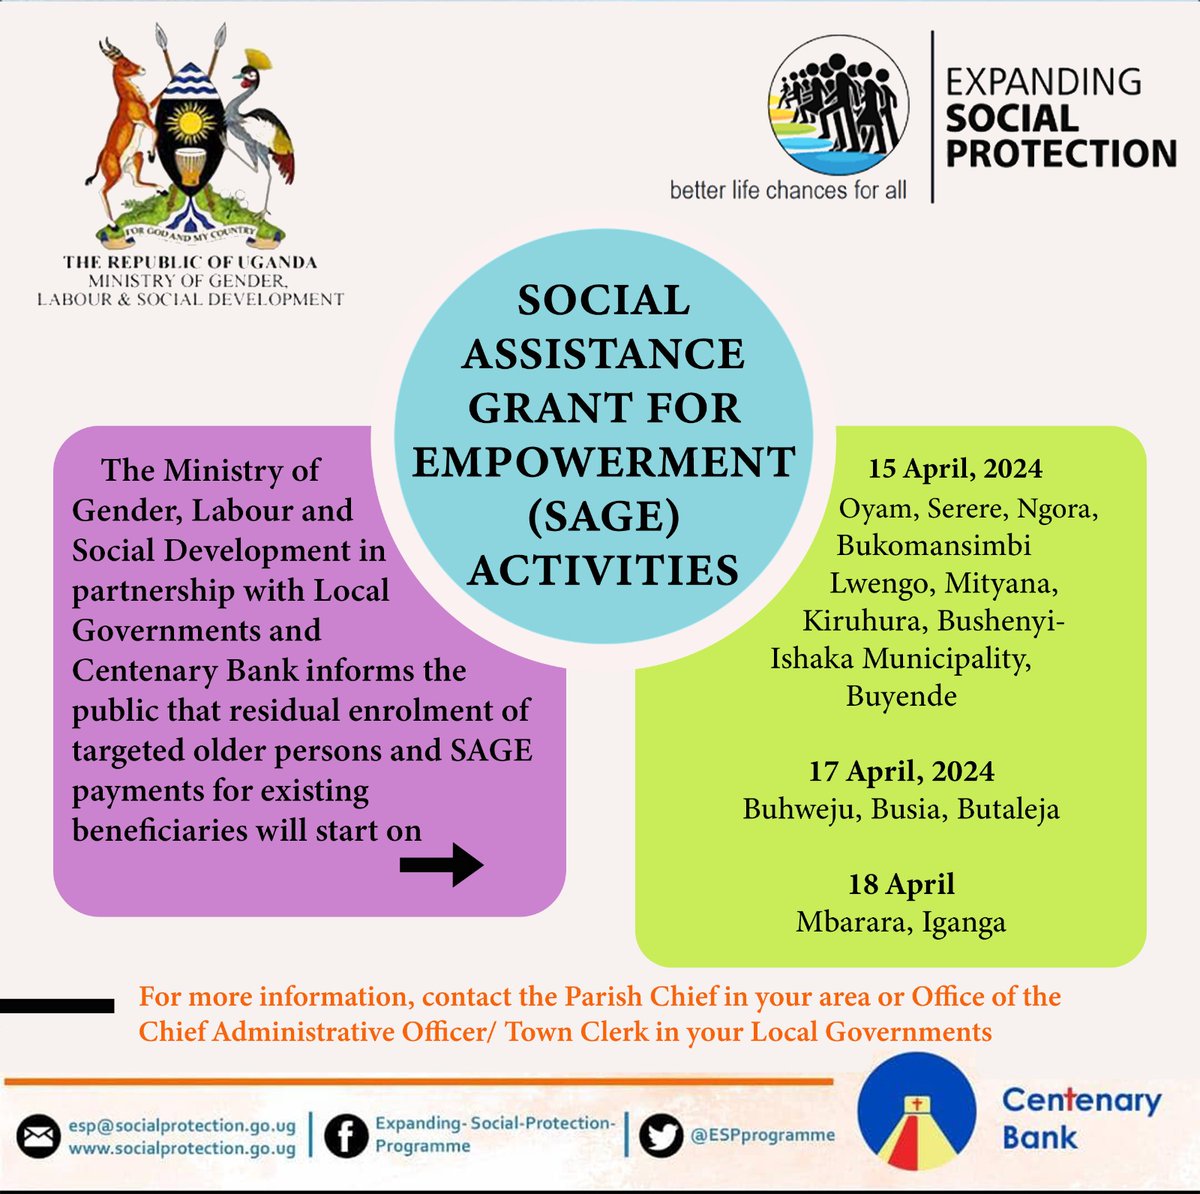 Weekly update: Beginning today 15th, the @ESPprogramme field teams, working with local governments and @CentenaryBank are paying out the SAGE cash to enrolled beneficiaries. See flier for details. @BettyAmongiMP @AggreyKibenge @mofpedU @MoLGUganda @GCICUganda @GovUganda